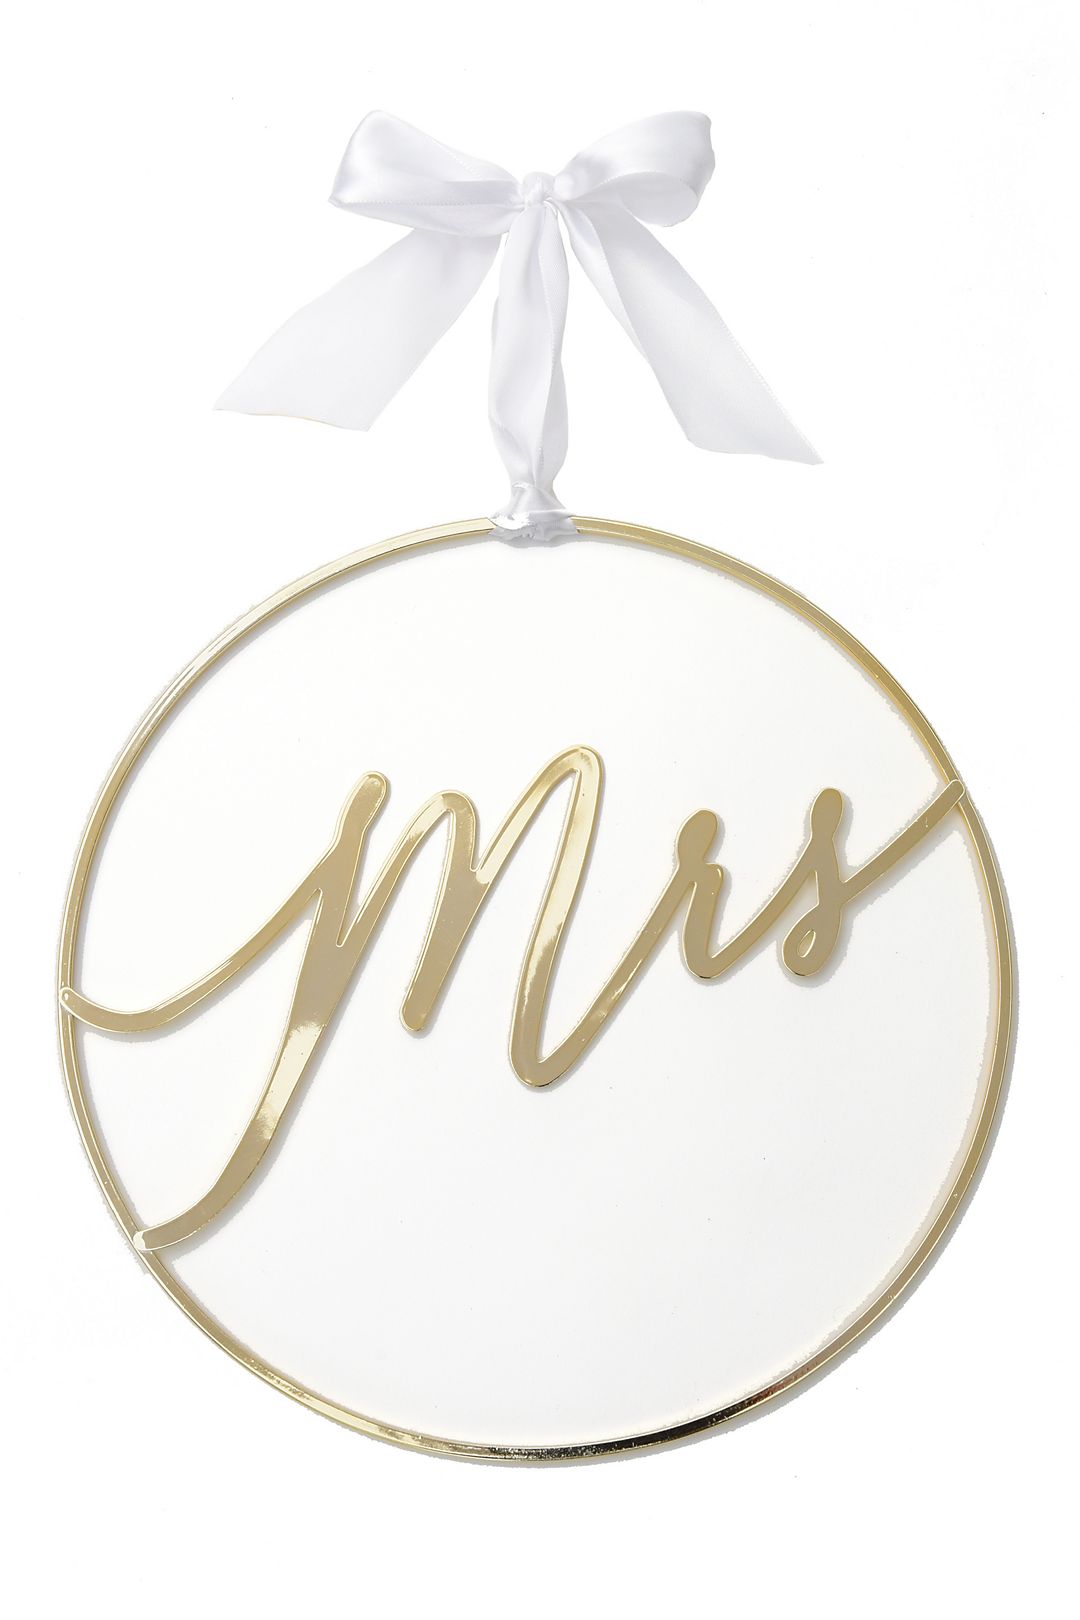 Mrs Gold-Tone Hoop Chair Sign with Bow Image 1